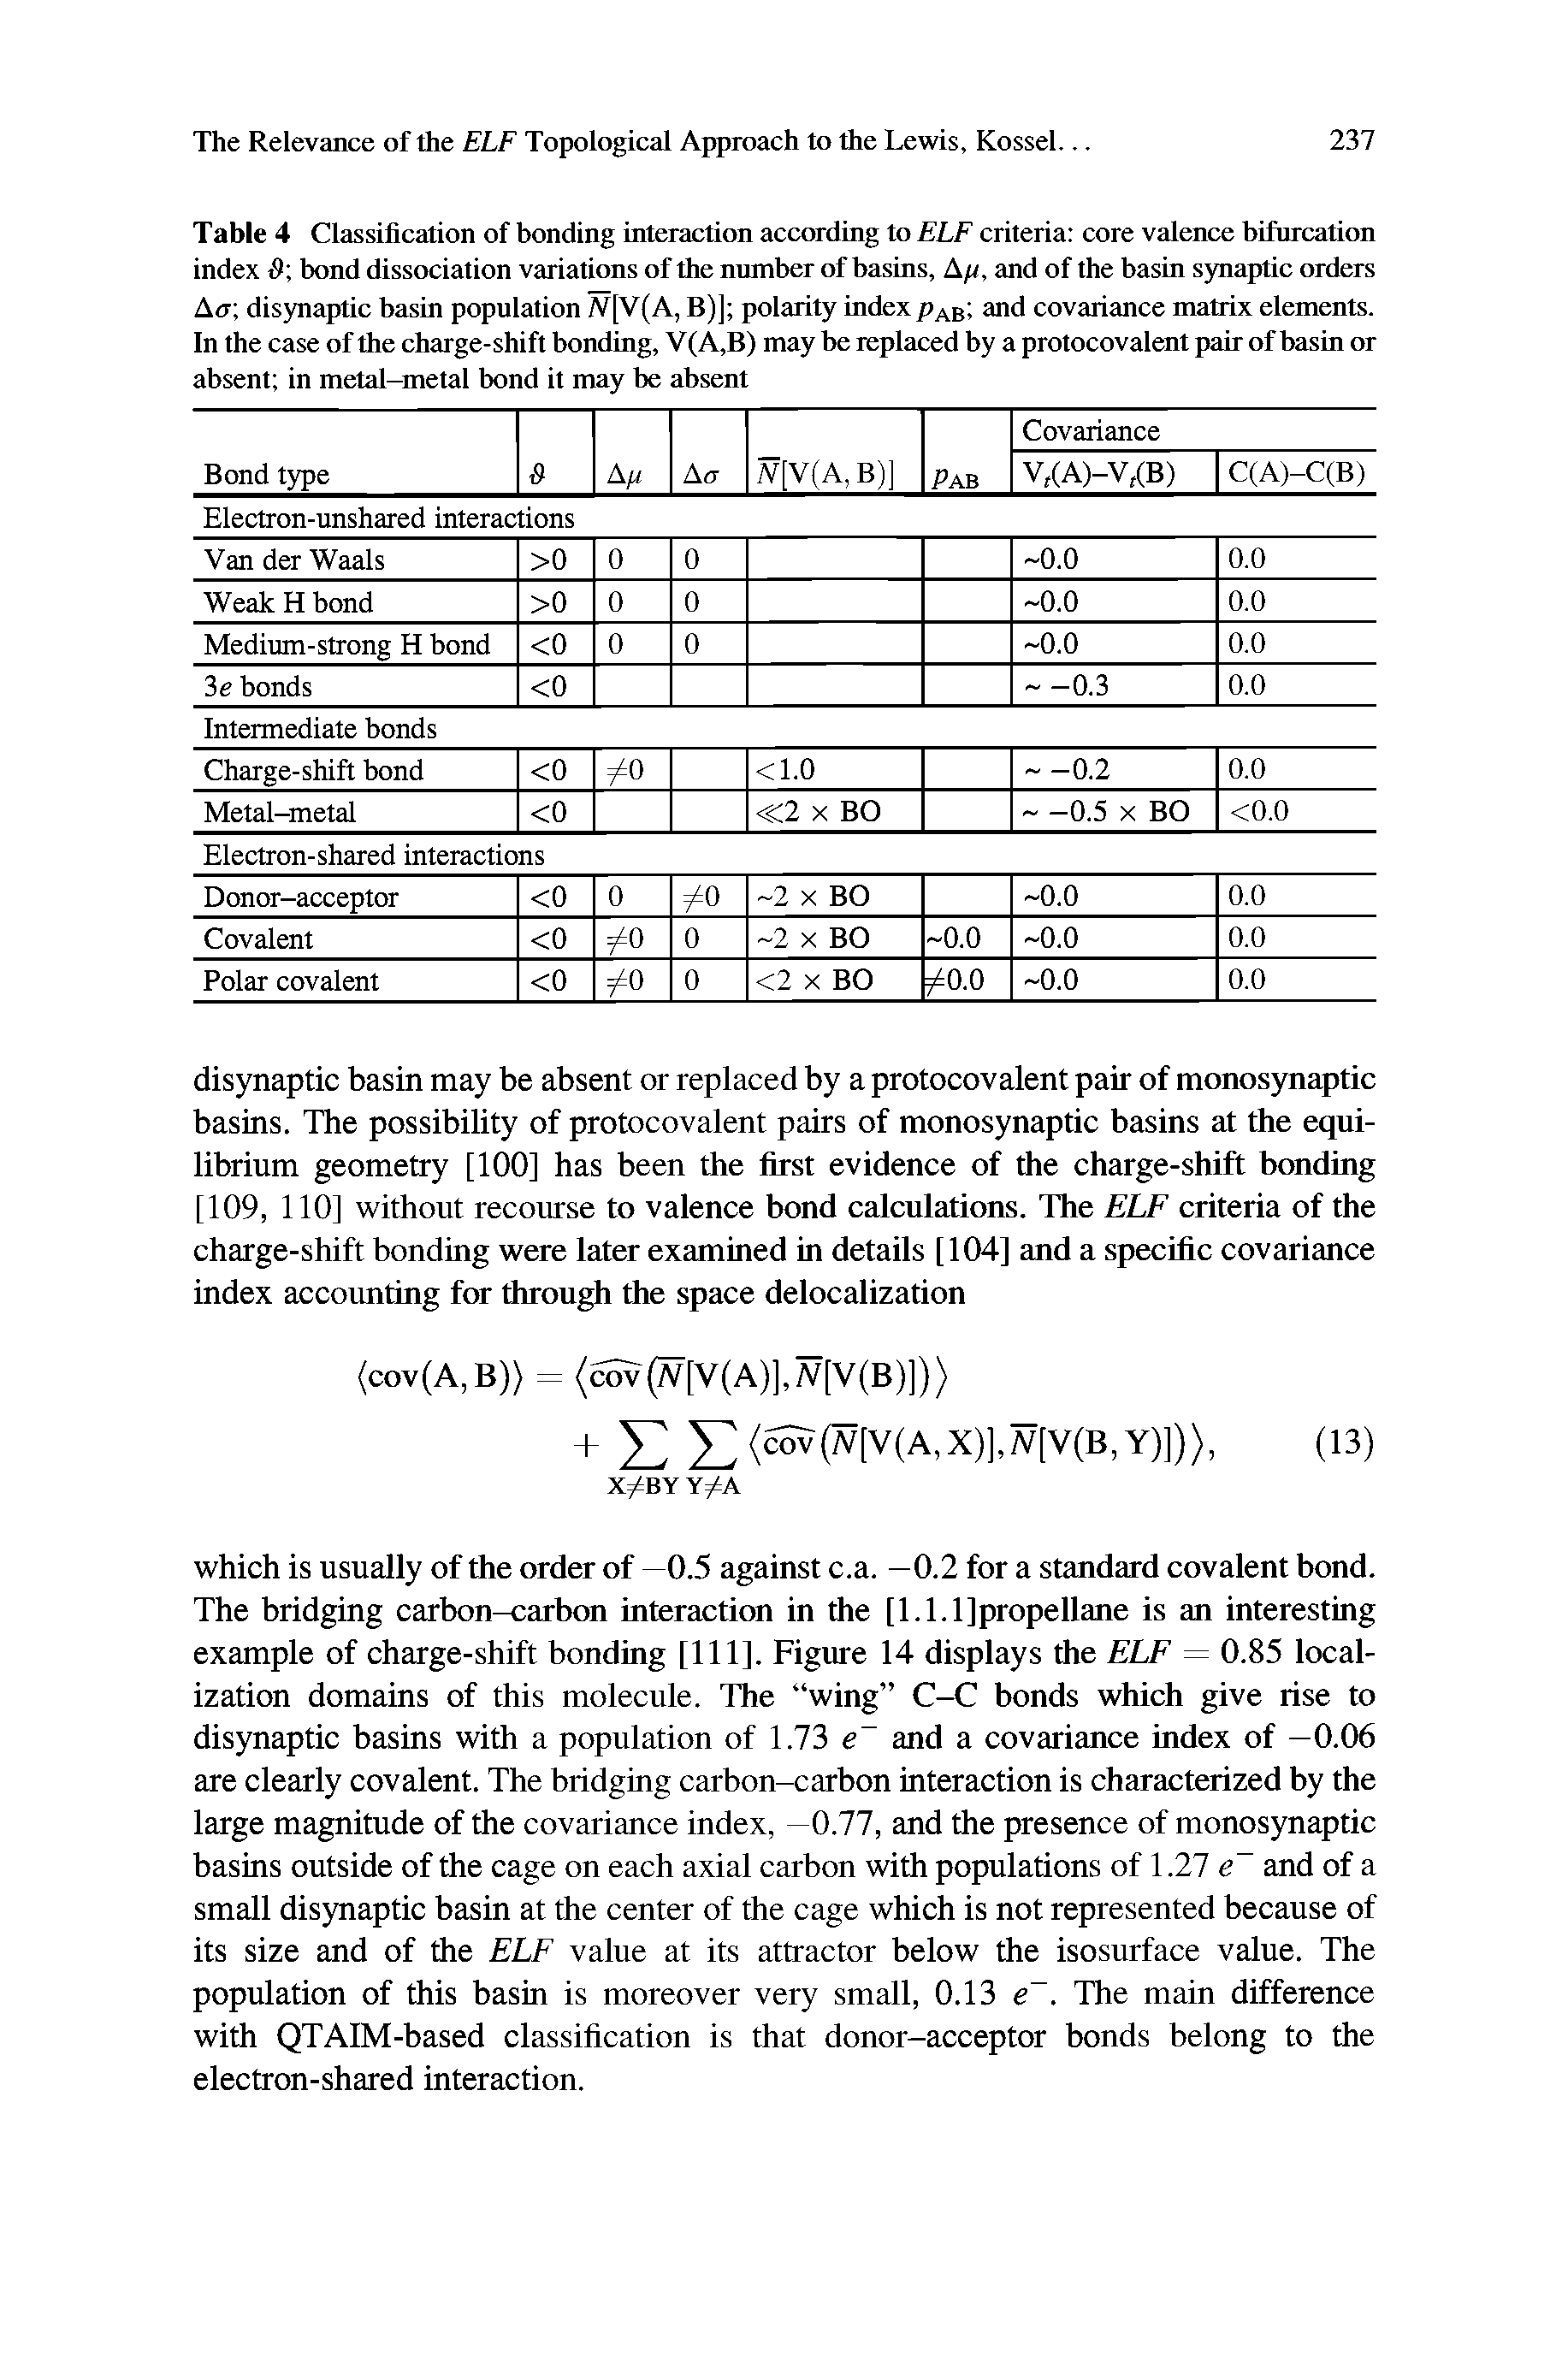 Table 4 Classification of bonding interaction accrading to ELF criteria core valence bifurcation index bond dissociation variations of the number of basins, A, and of the basin synaptie orders A<t disynaptic basin population fV[V(A, B)] polarity indexand covariance matrix elements. In the case of the charge-shift bonding, V(A,B) may be replaced by a protocovalent pair of basin or absent in metal-metal bond it may be absent...